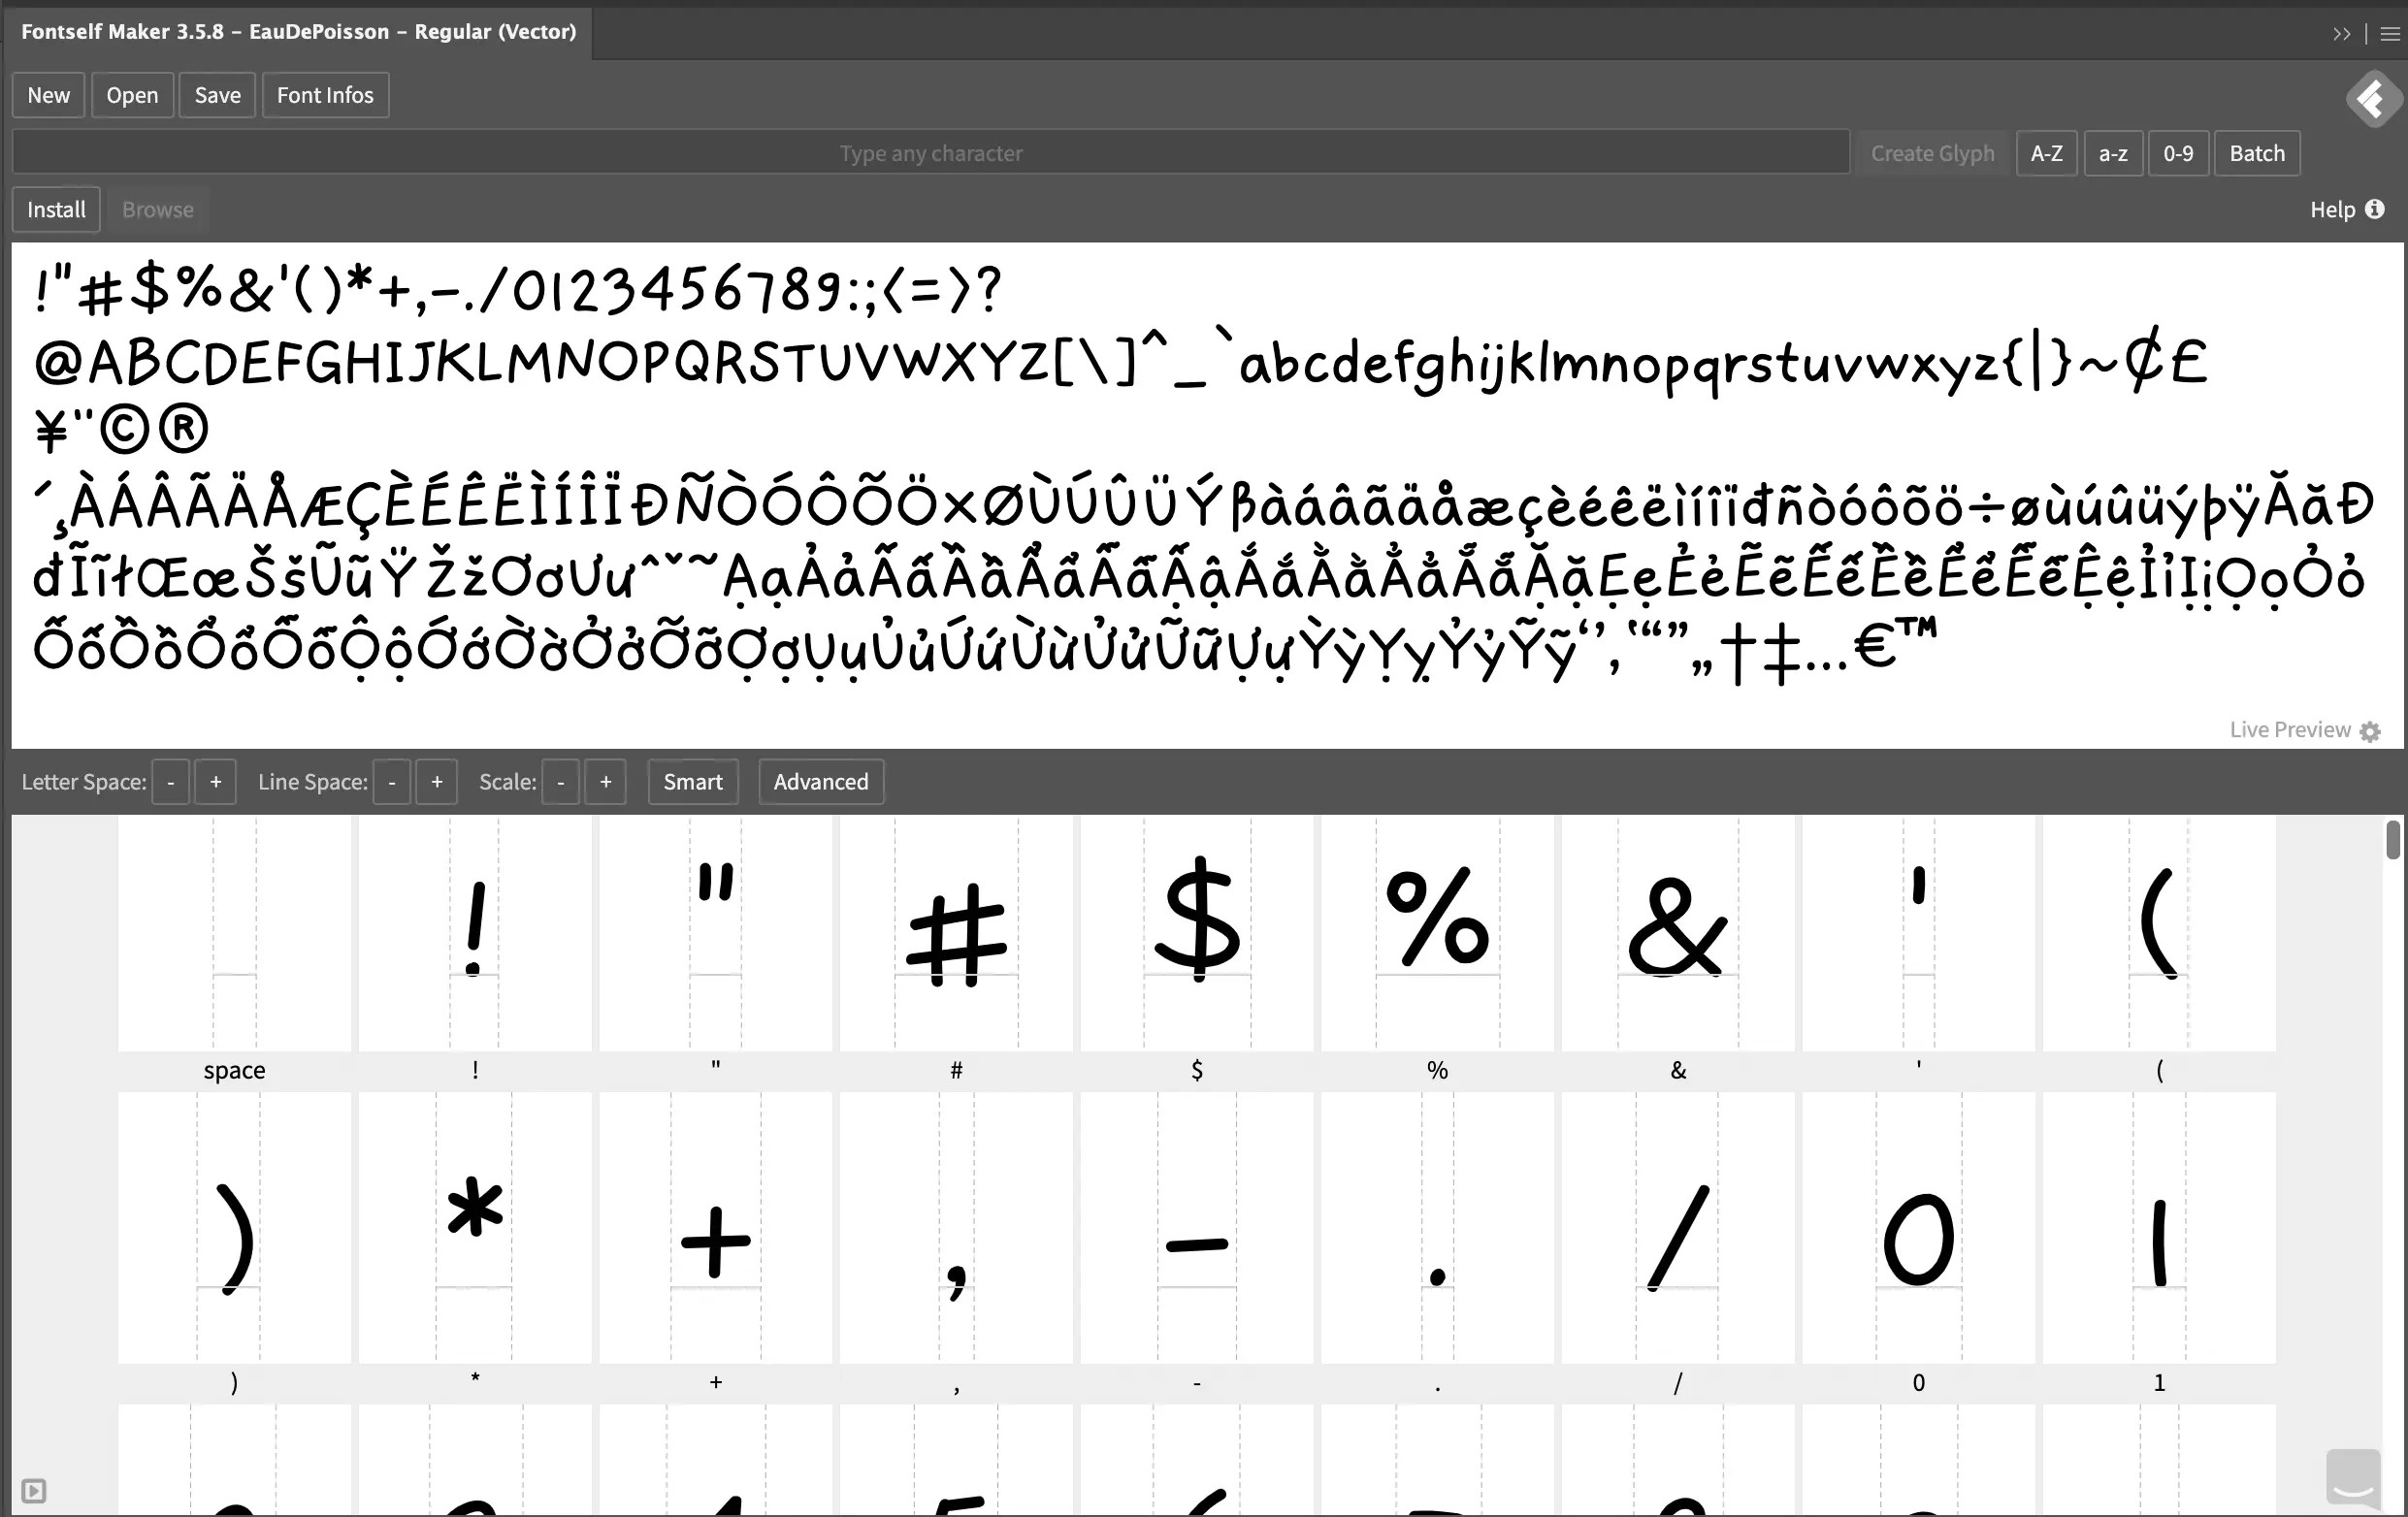 Overview of all characters in the Fontself plugin